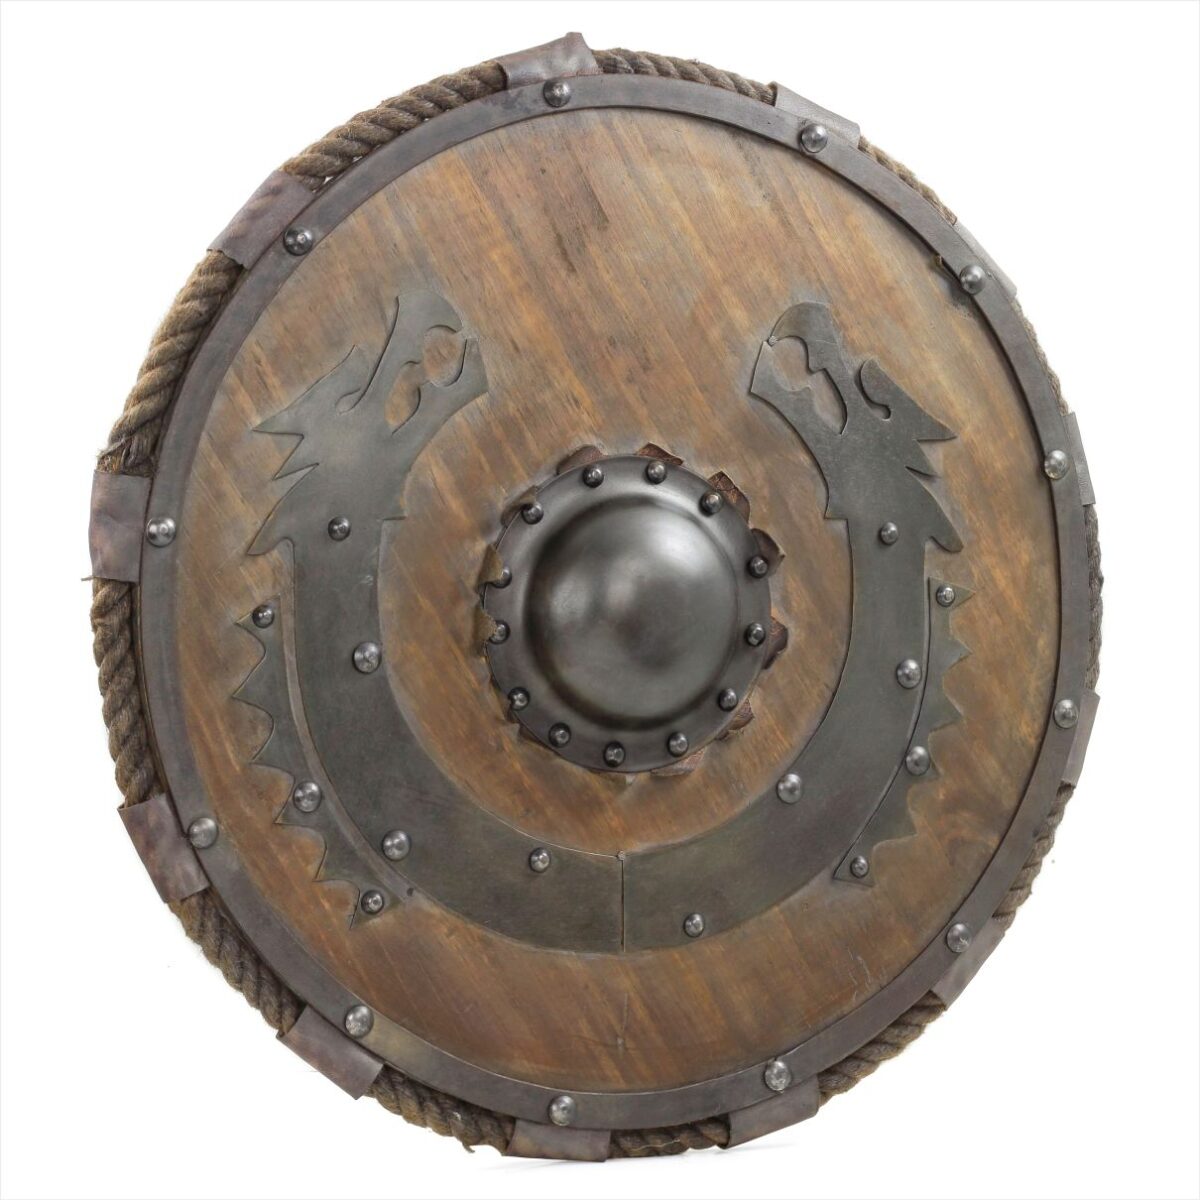 Medieval Wooden Viking Flying Dragon Armour Shield Antique Finish with Handles & Rope | Round Handcrafted Knight Steel Battle Reenactment Safety Shield